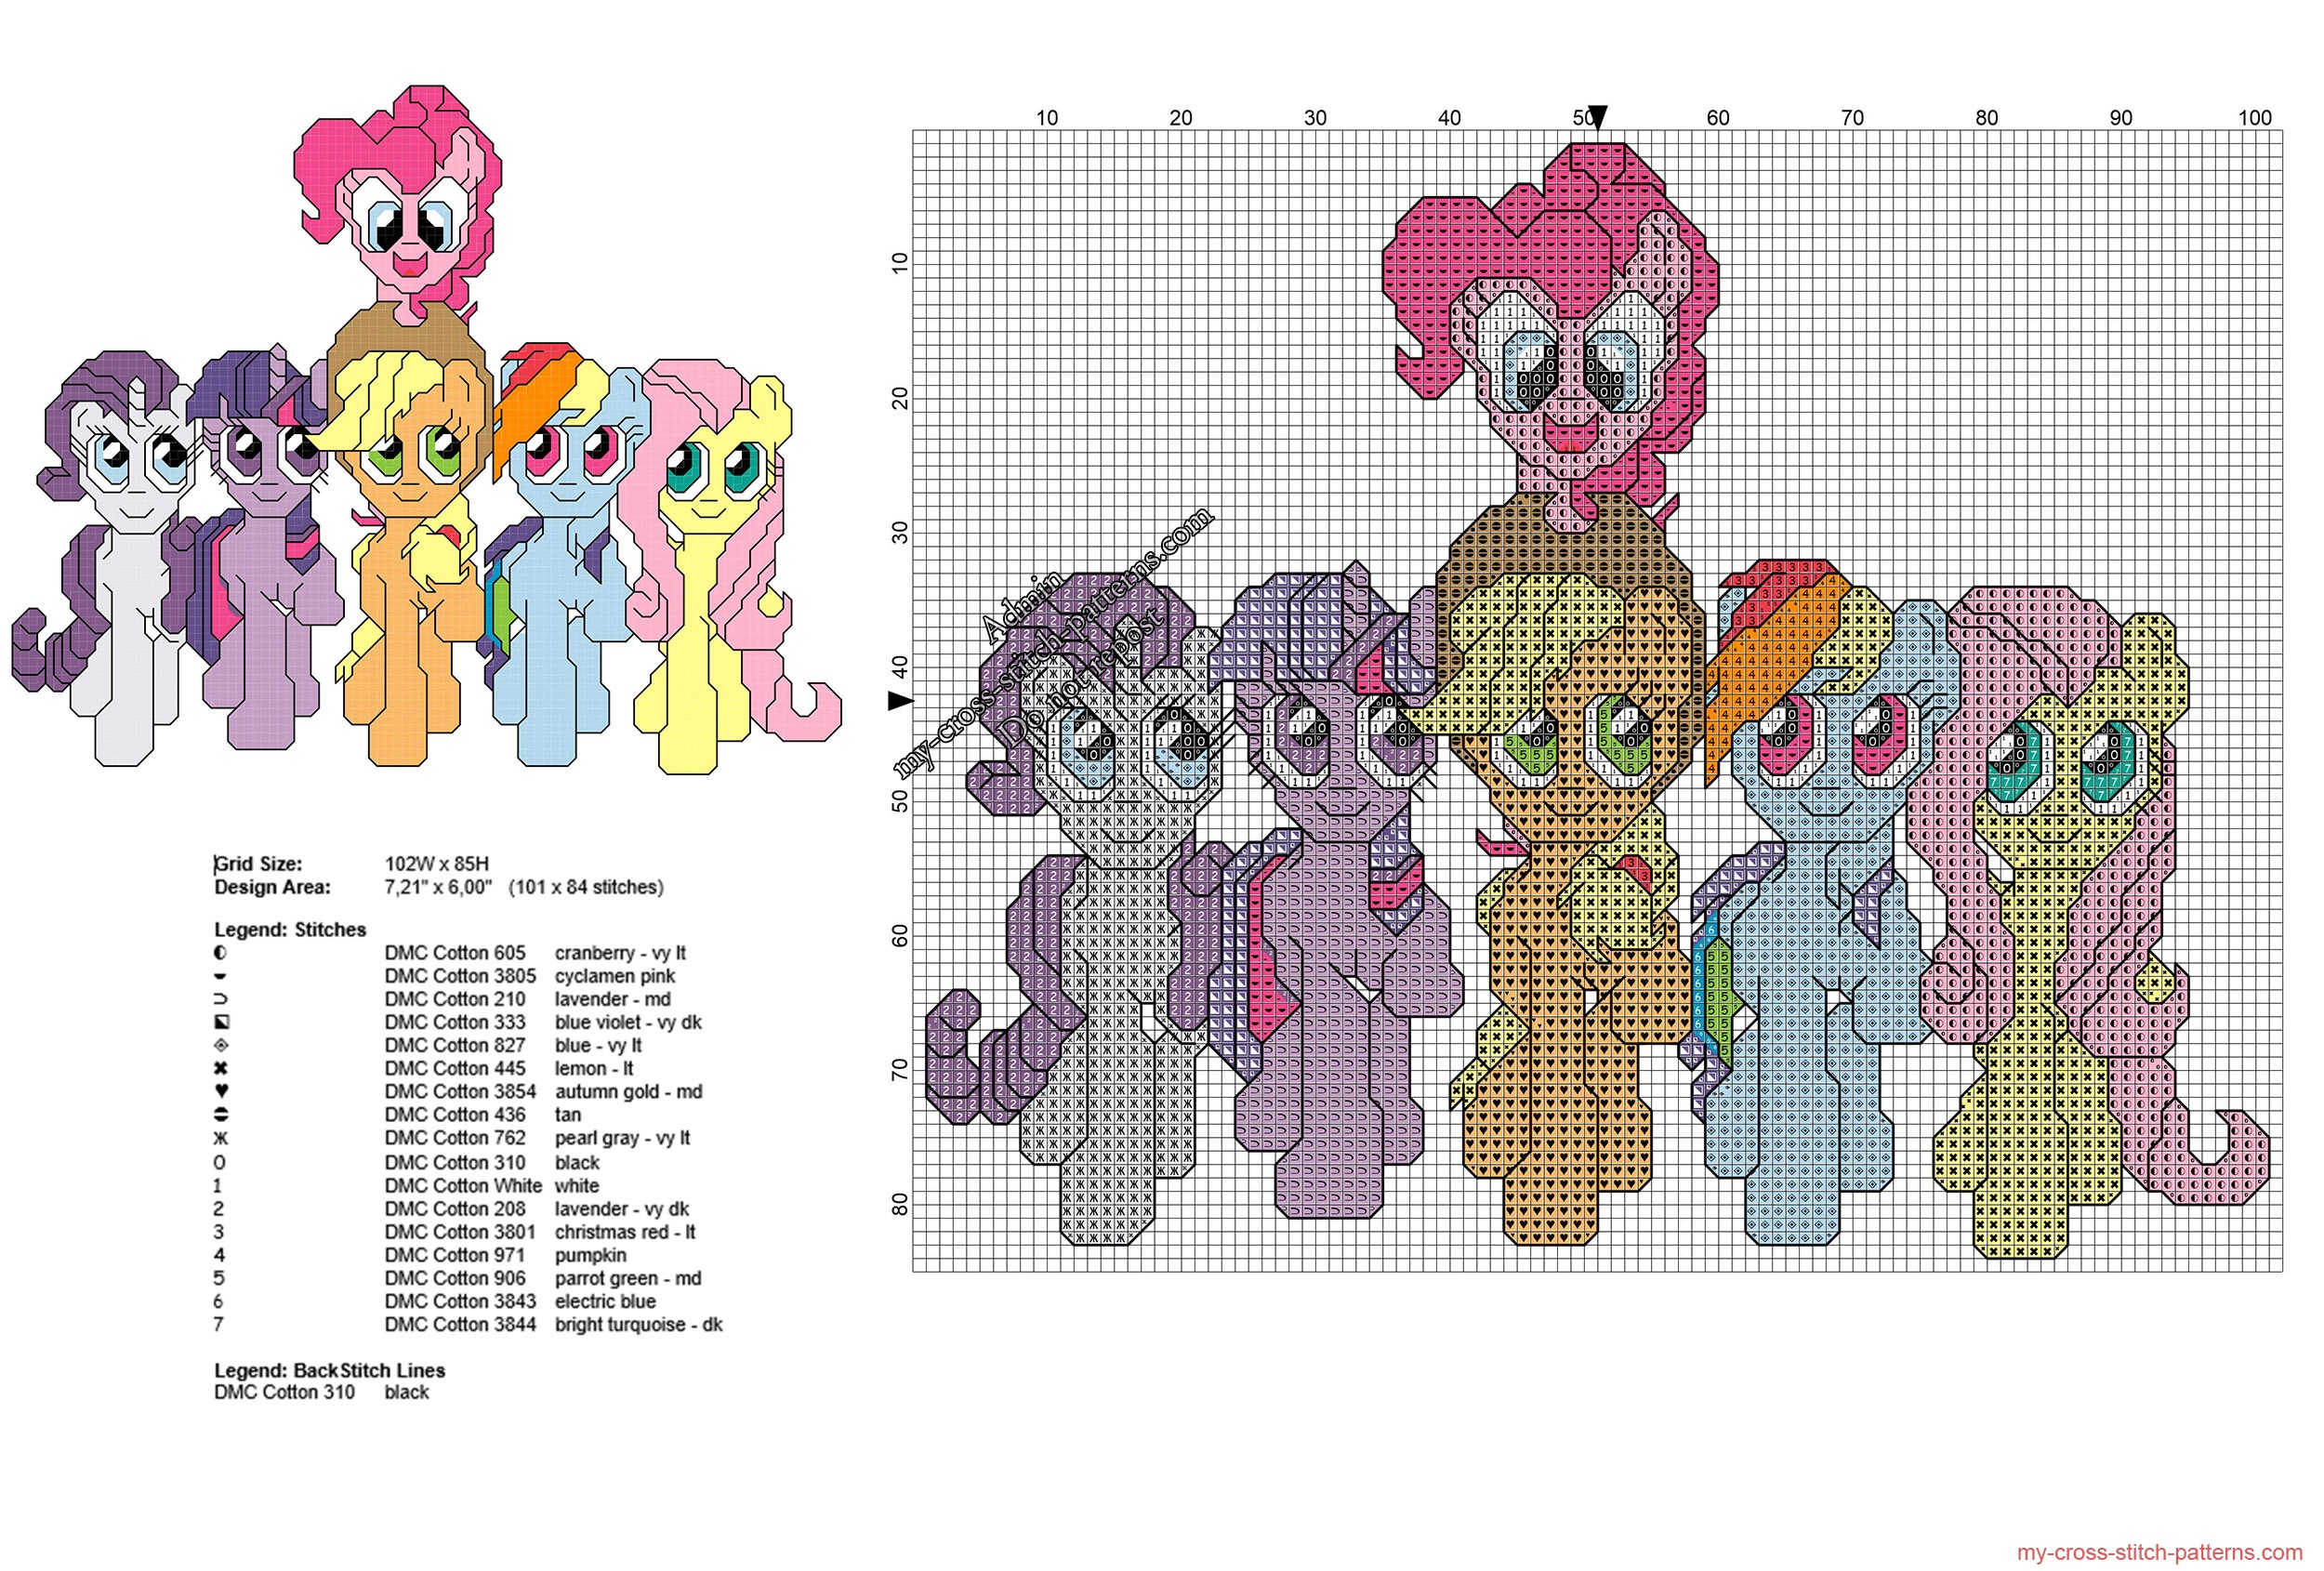 all_my_little_pony_together_free_cross_stitch_pattern